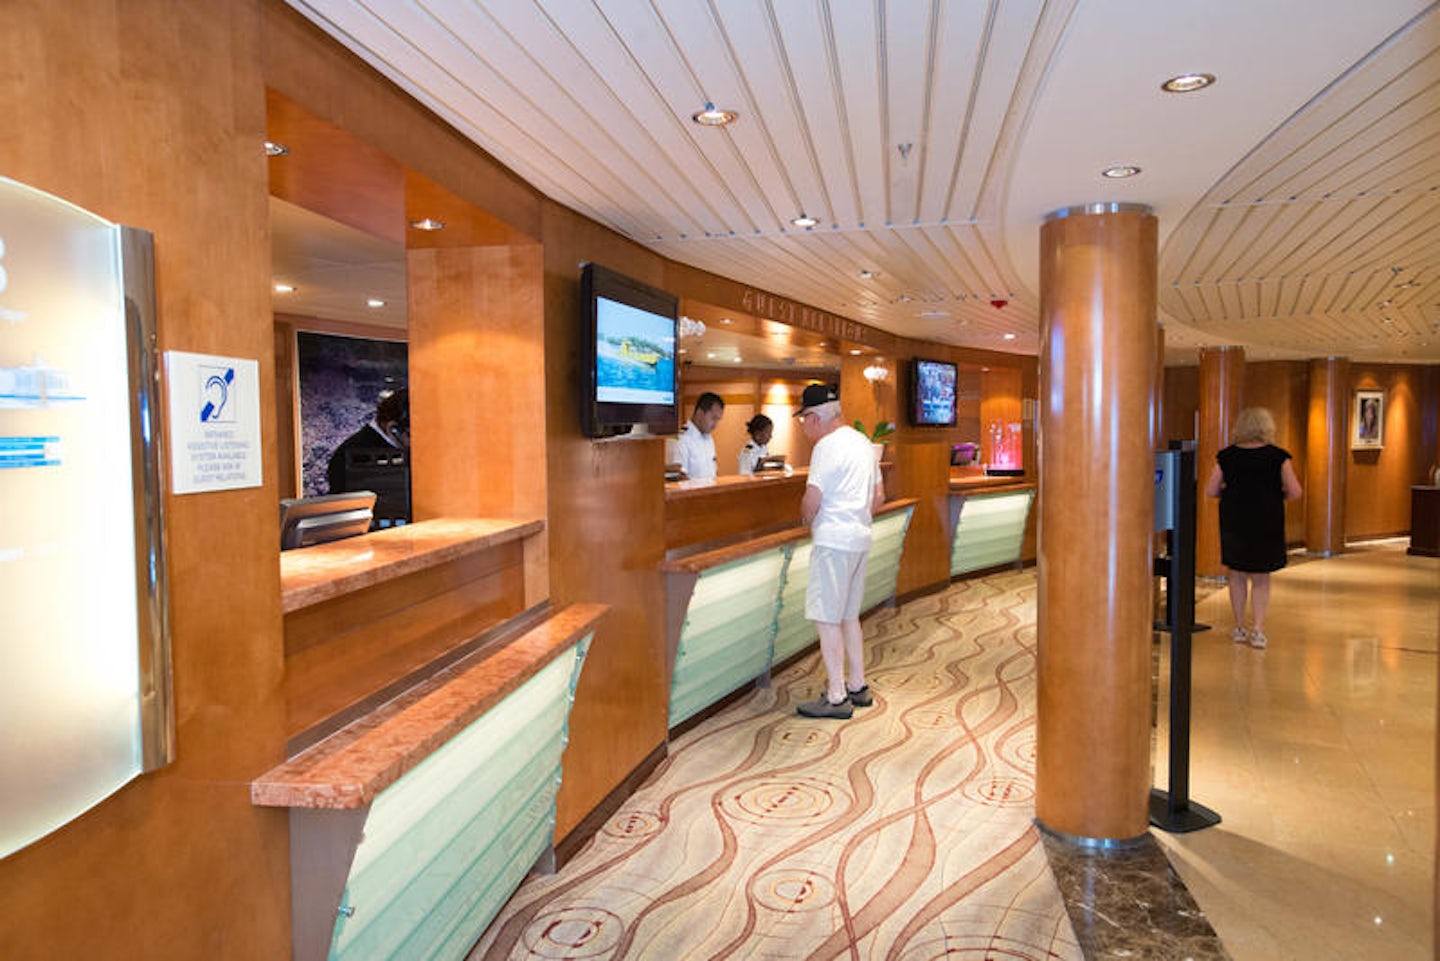 Guest Relations Desk on Celebrity Summit